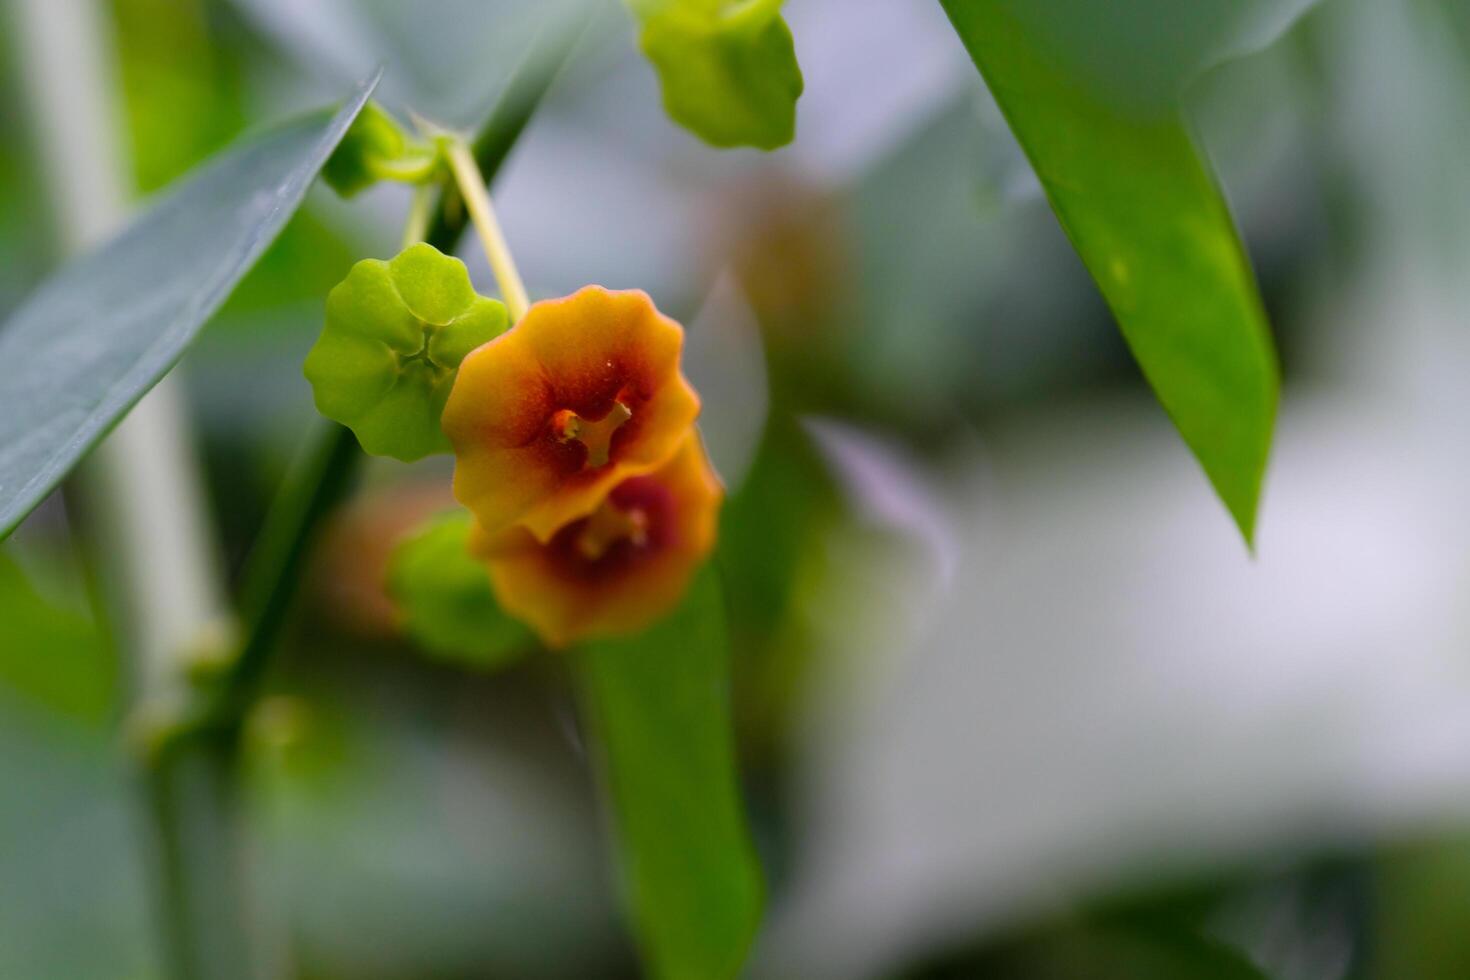 Macro Photography. Selective Focus. Close Up shot of yellow-orange Tecoma Stans or Trumpet Bushes Flowers. Flowering Plants Tecoma stans among the leaves. Pretty Background photo